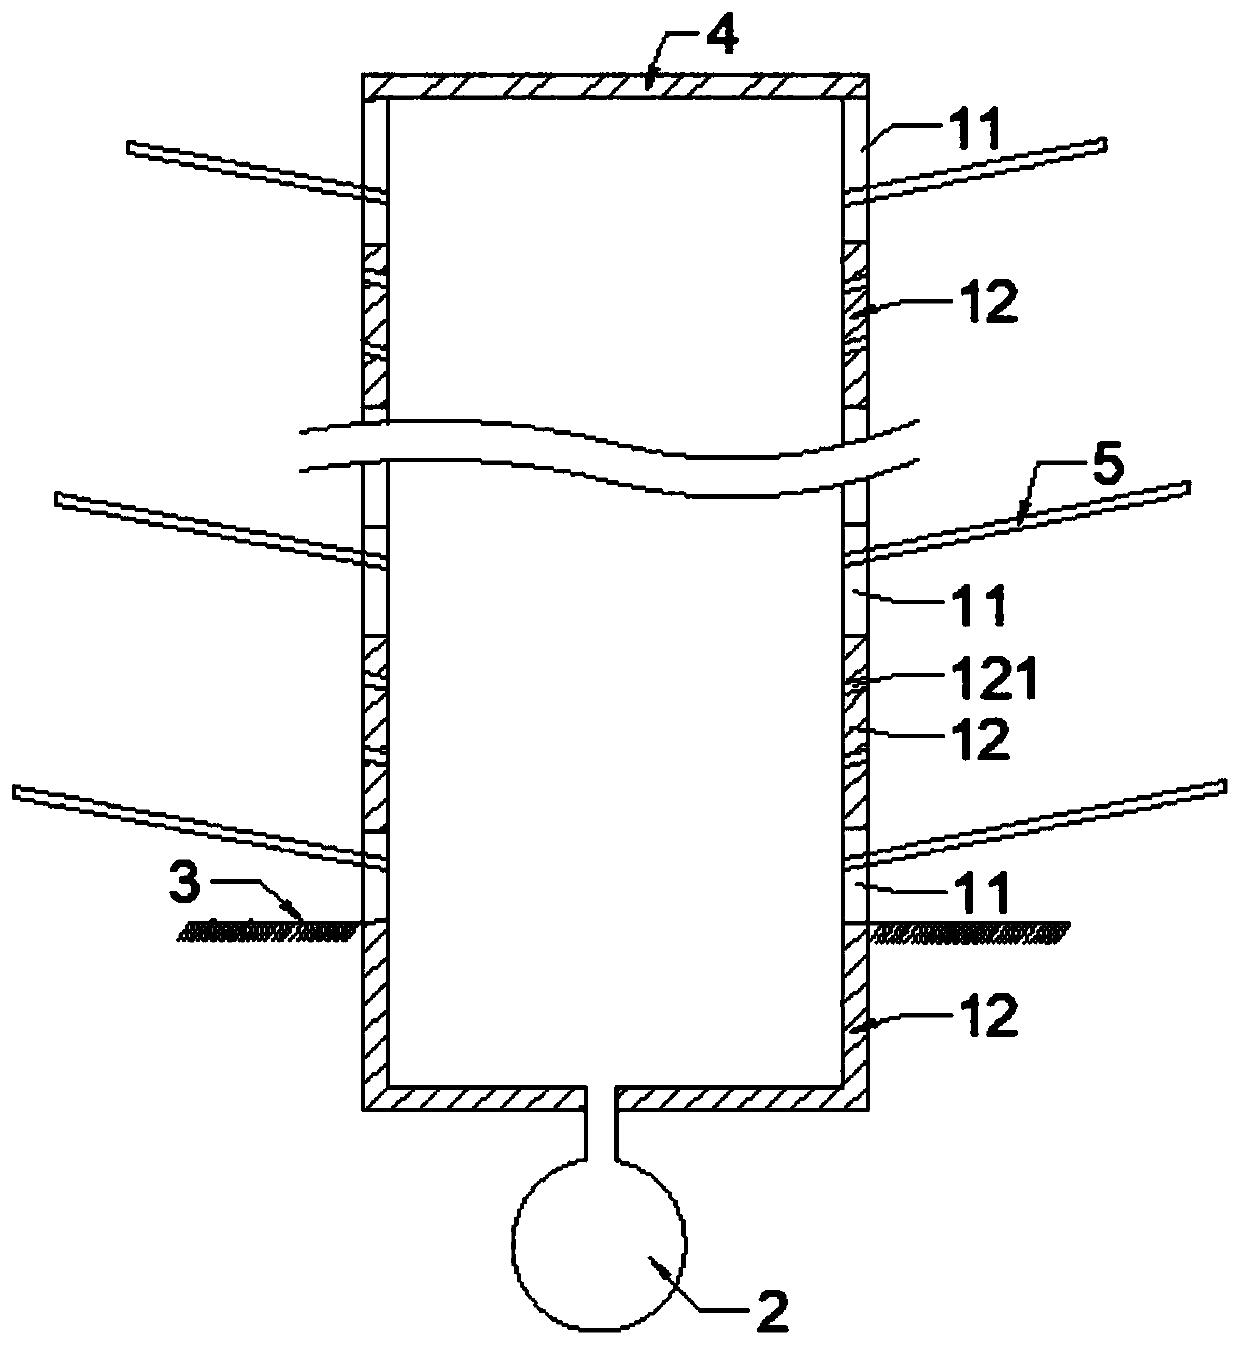 Serial water-collecting well drainage device and method for landslide control